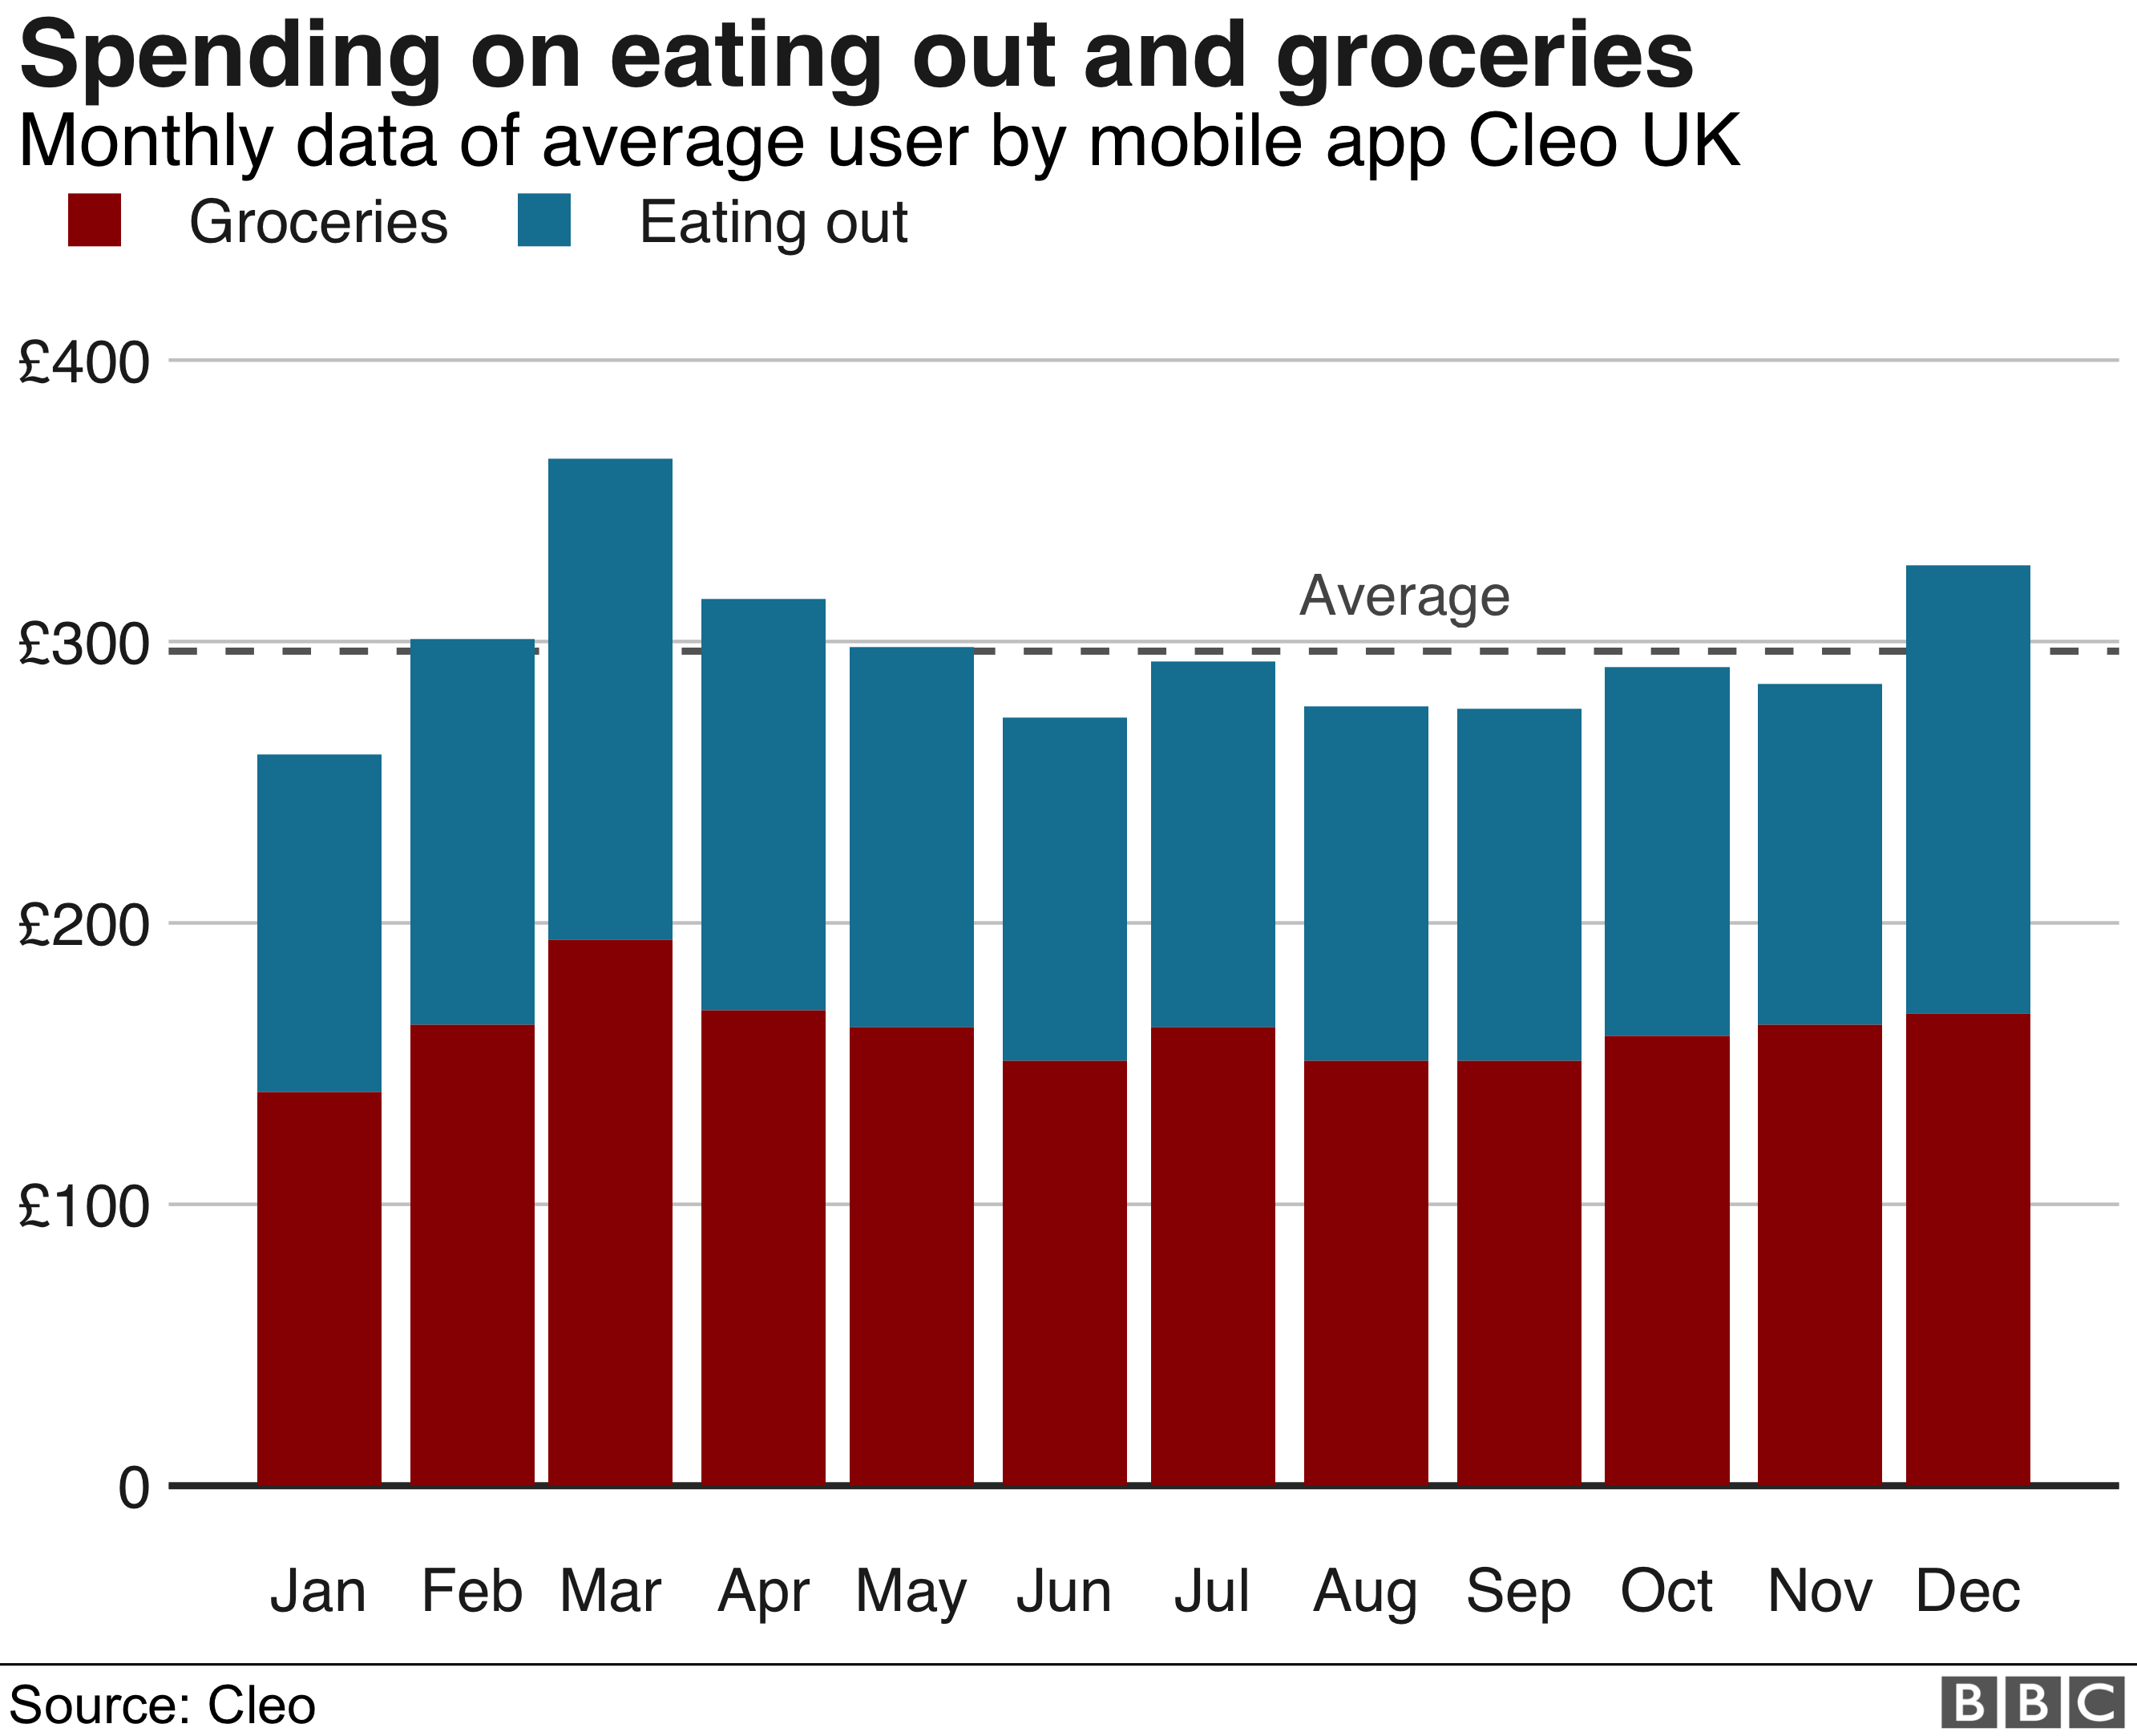 Chart showing spending on eating out and groceries